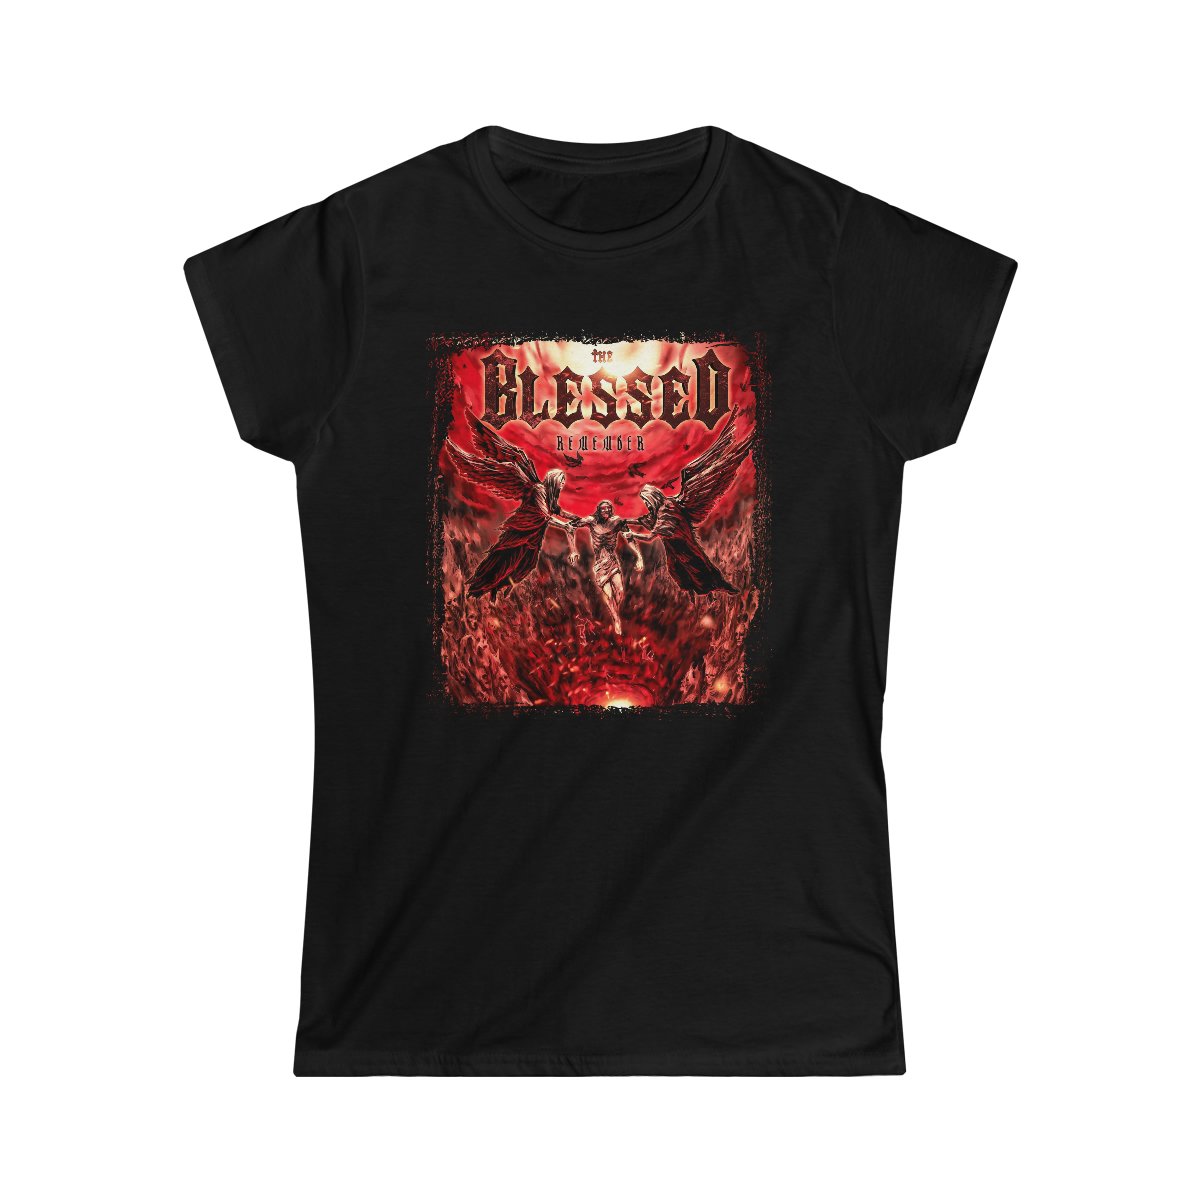 The Blessed – Remember Short Sleeve Tshirt 64000L